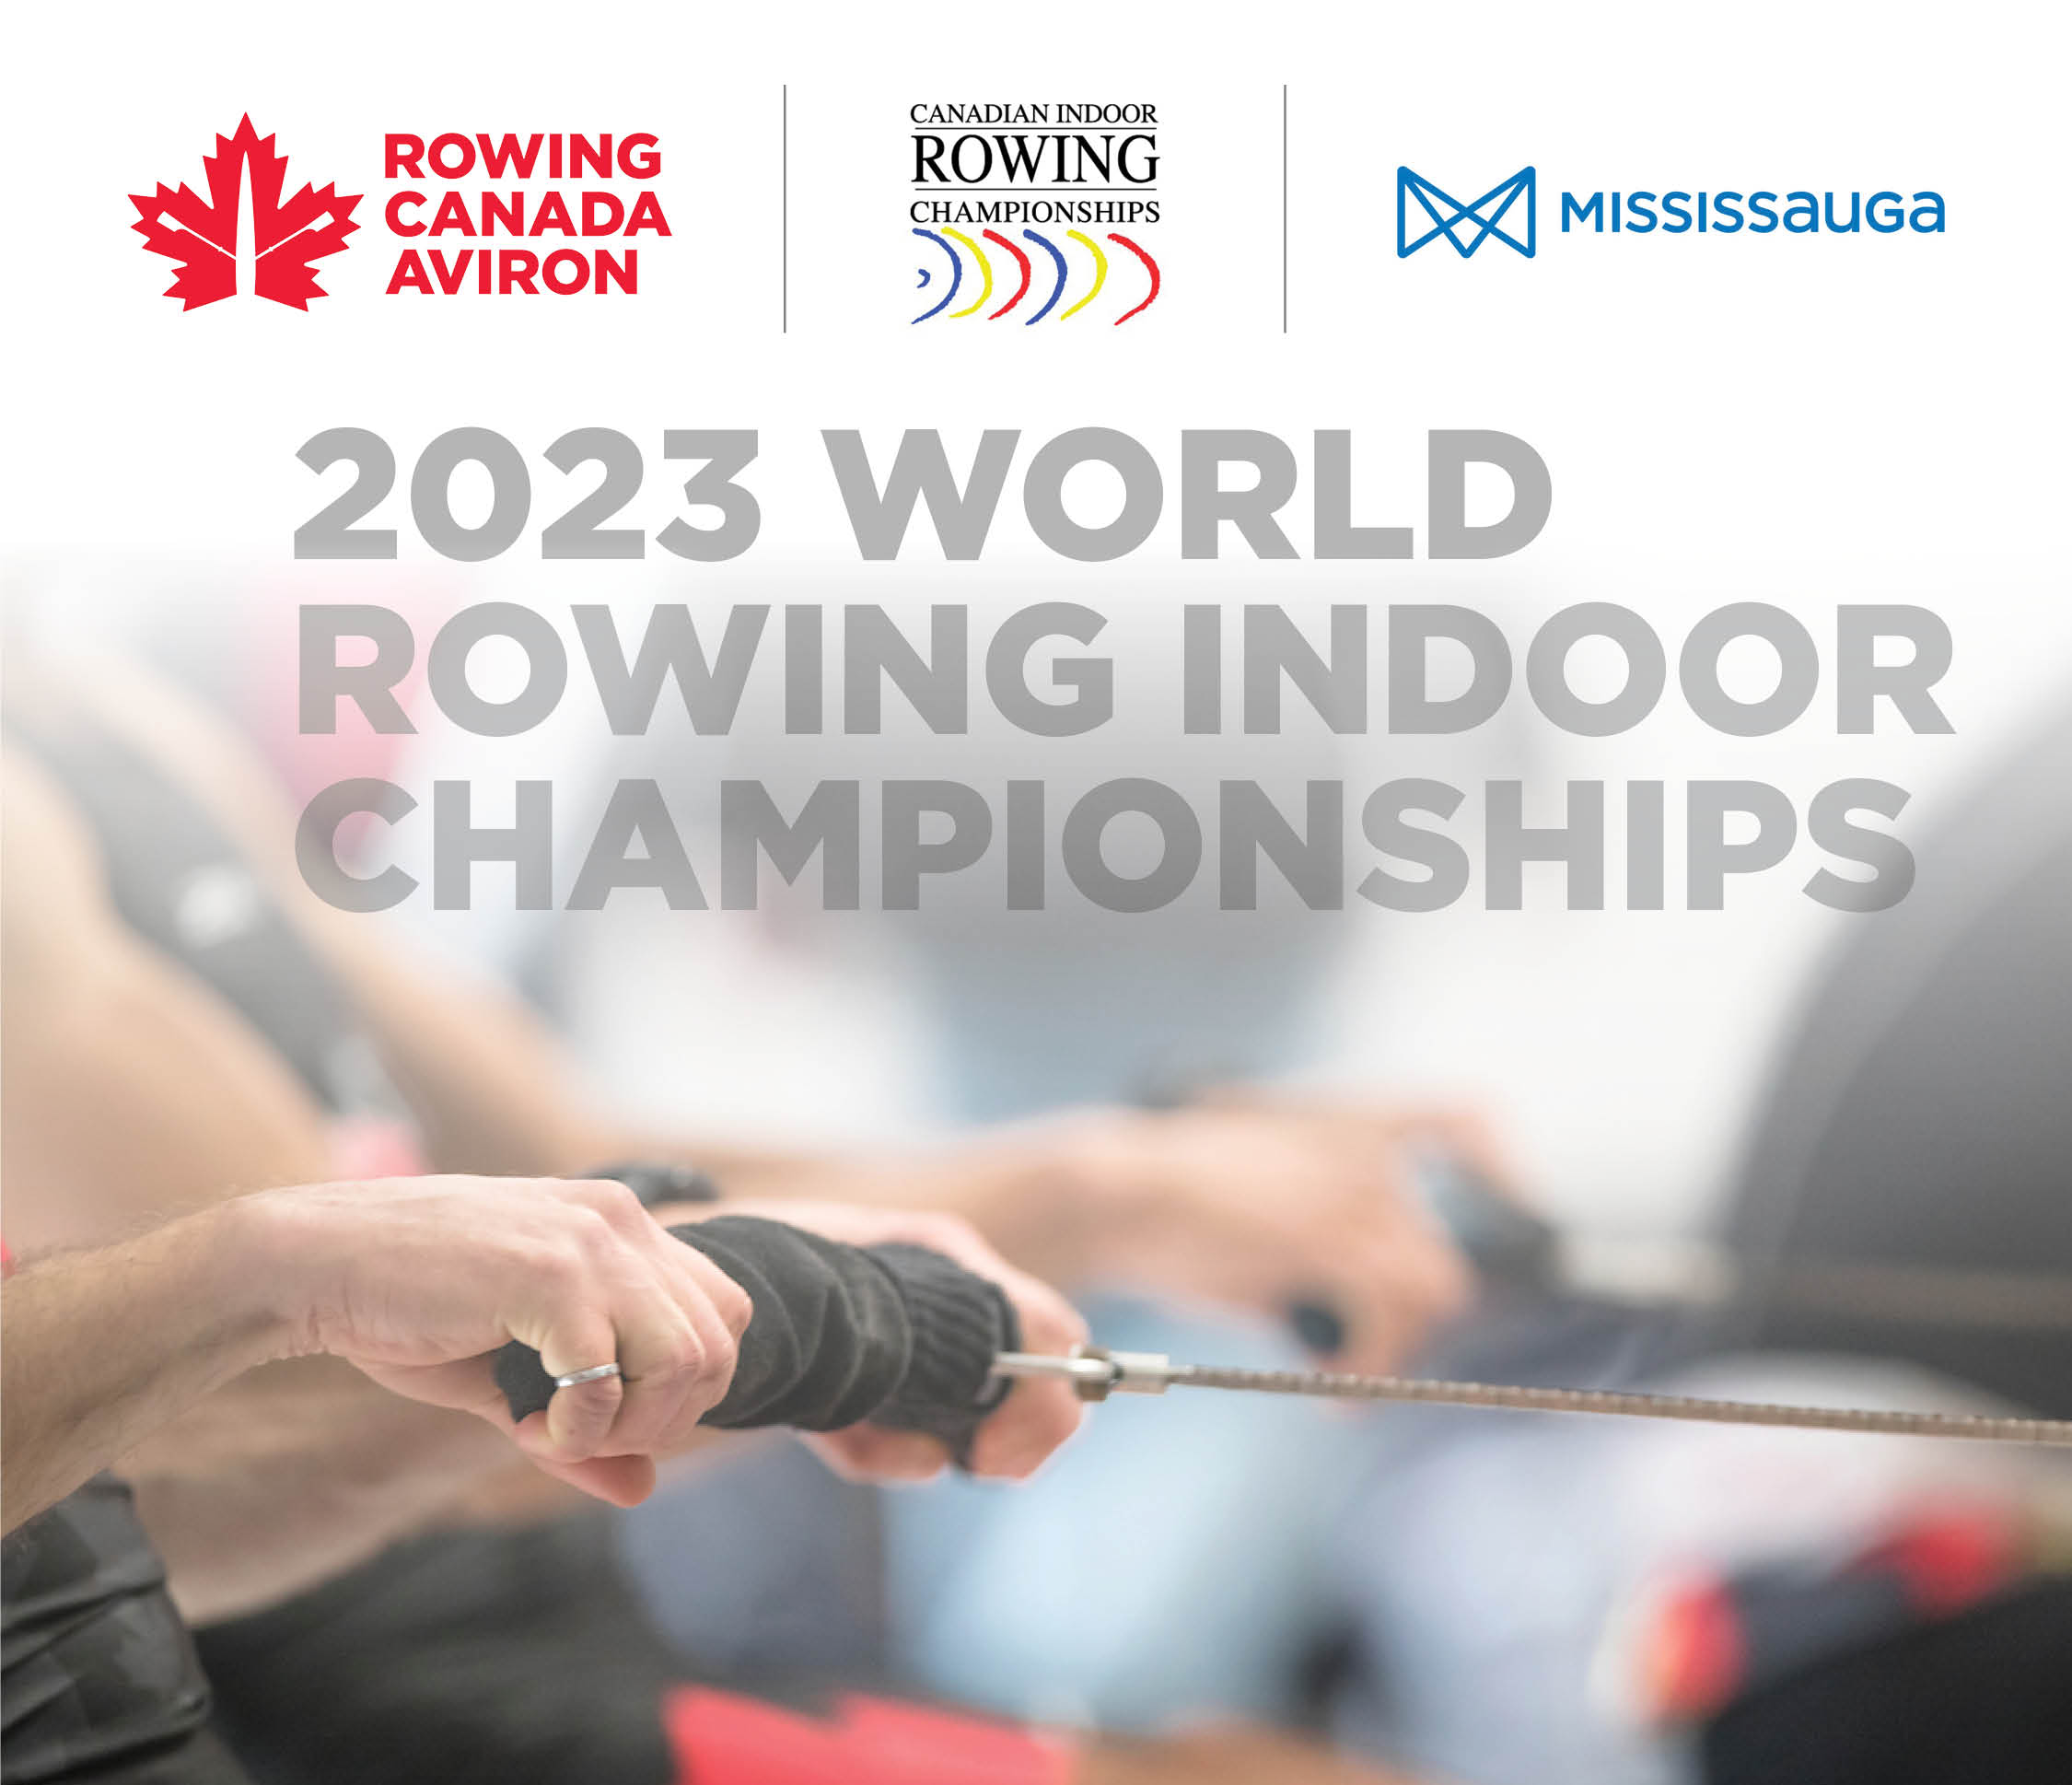 Mississauga named host of 2023 World Rowing Indoor Championships